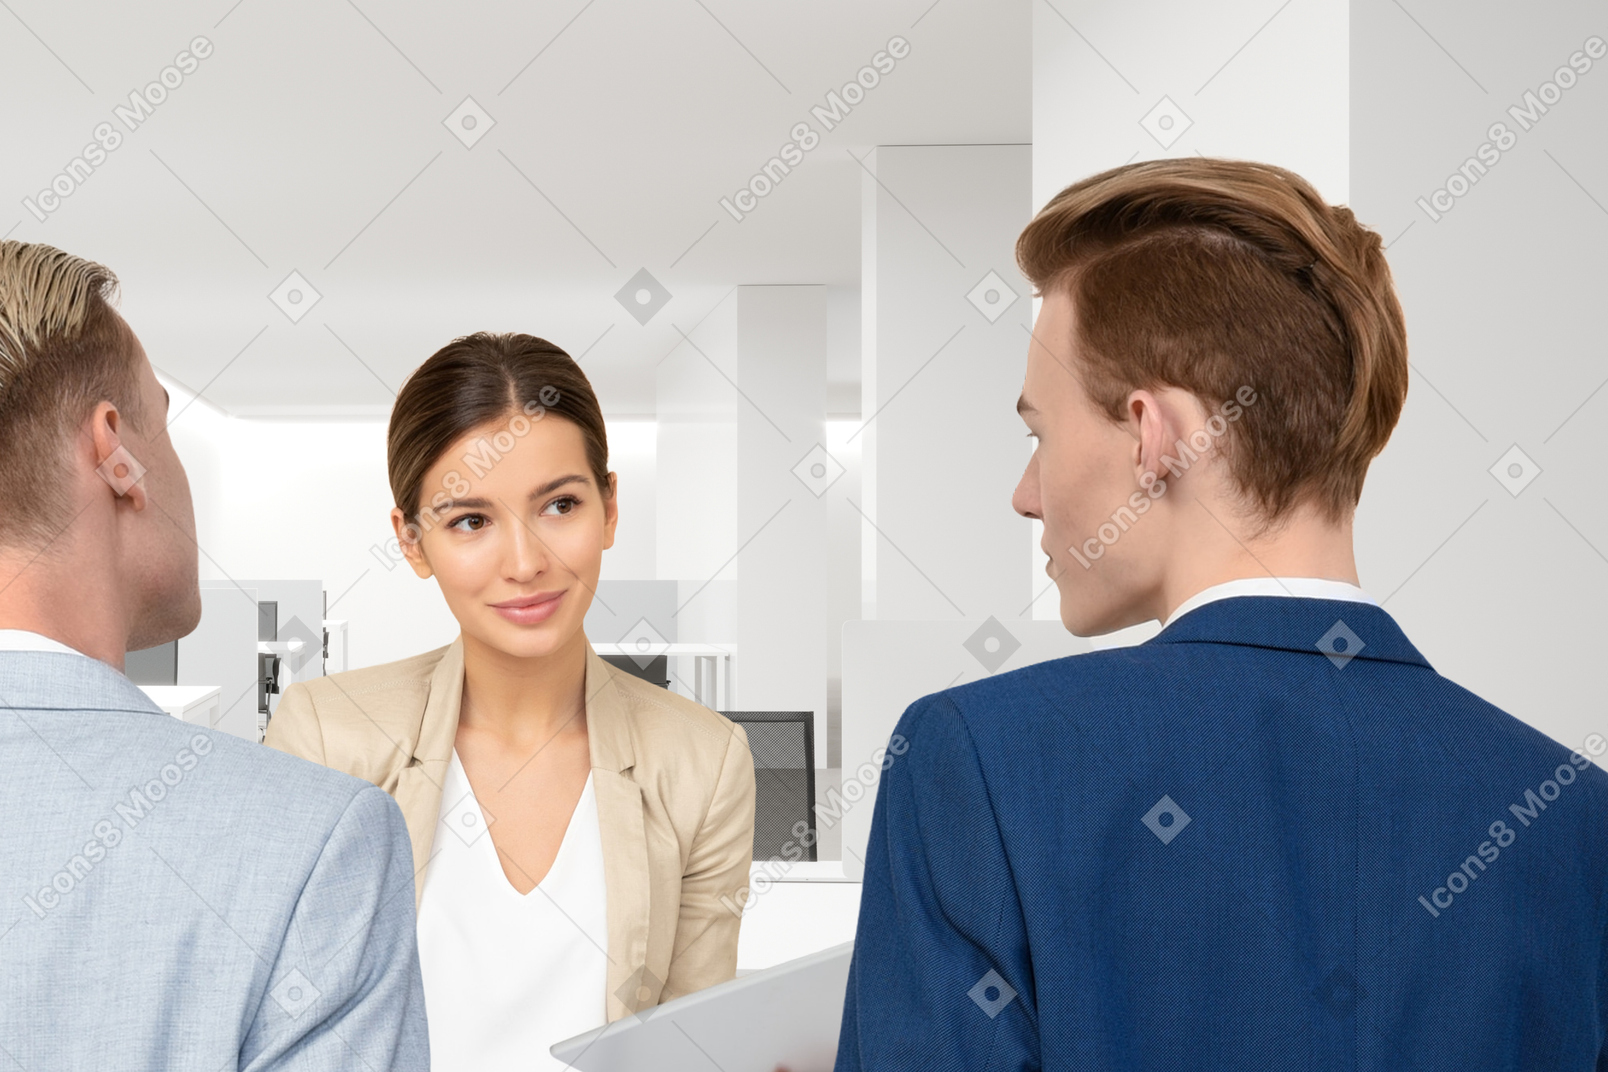 Man and woman in a meeting